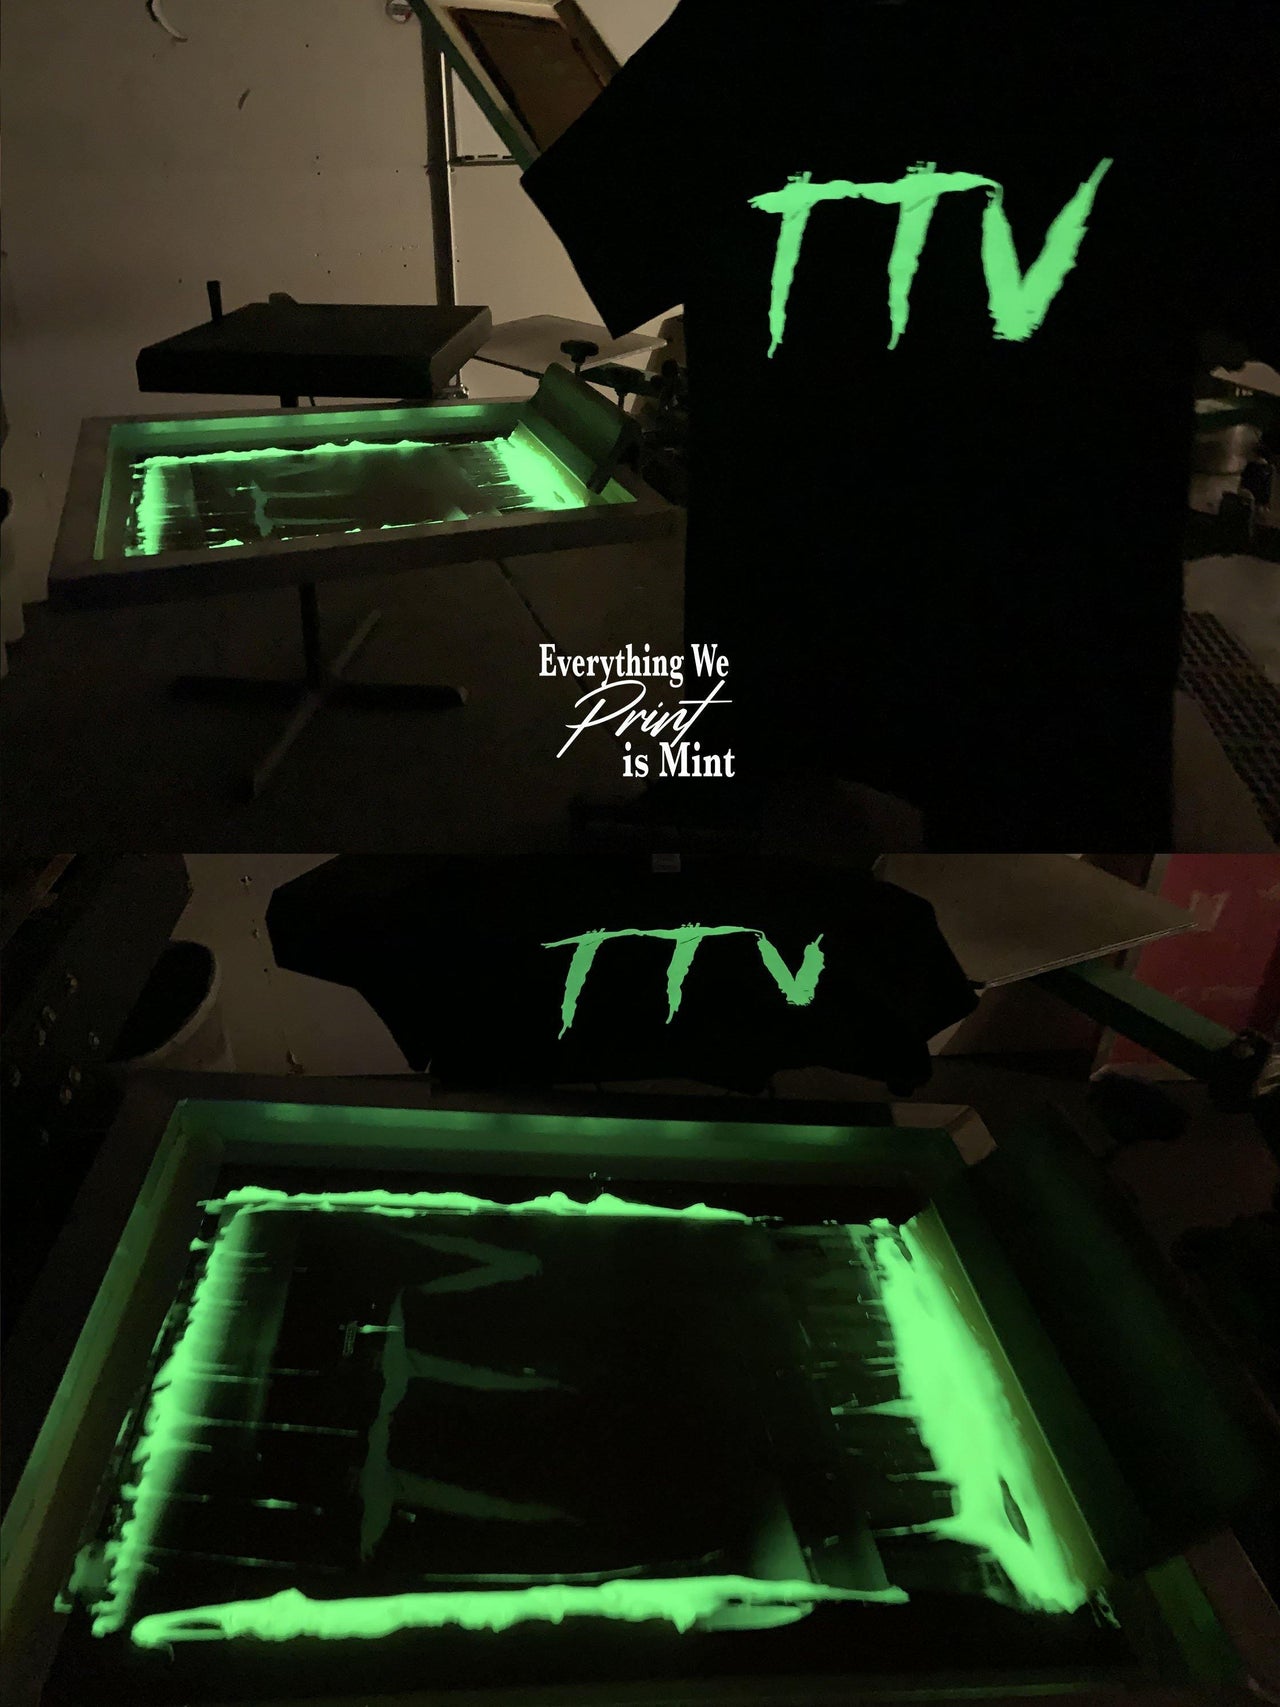 25 Glow in the Dark T-Shirts - Constantly Create Shop